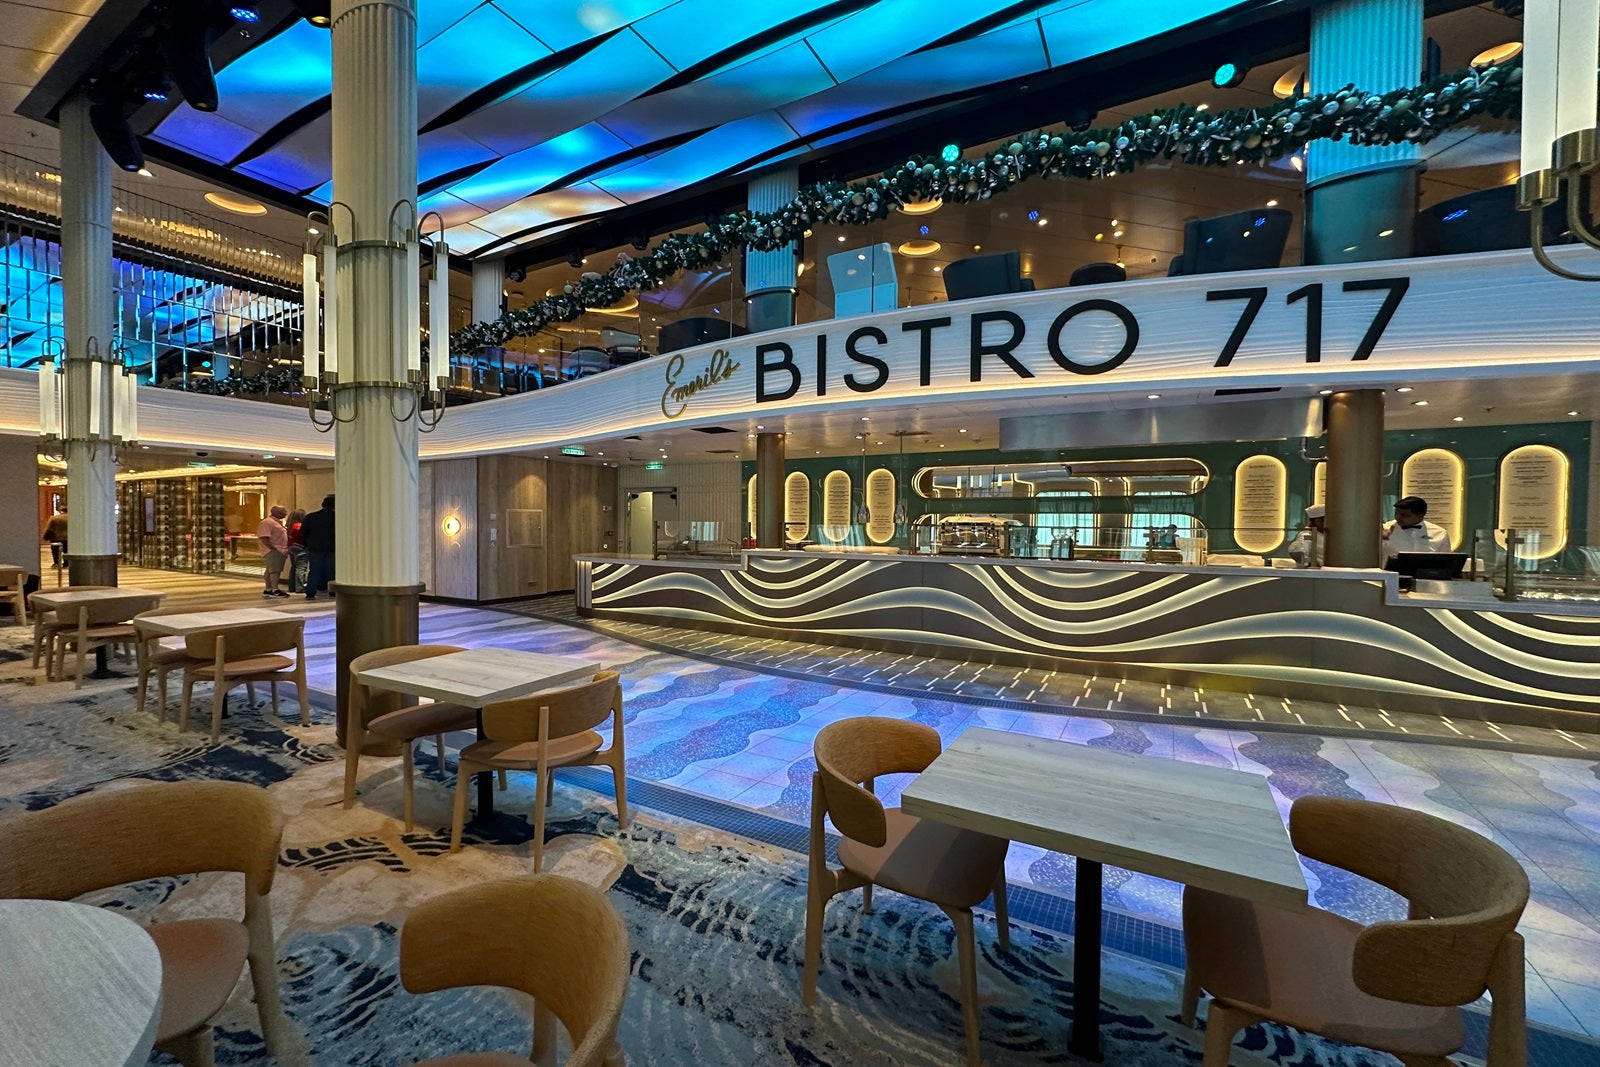 A counter-service restaurant along a cruise ship indoor promenade with seating in front